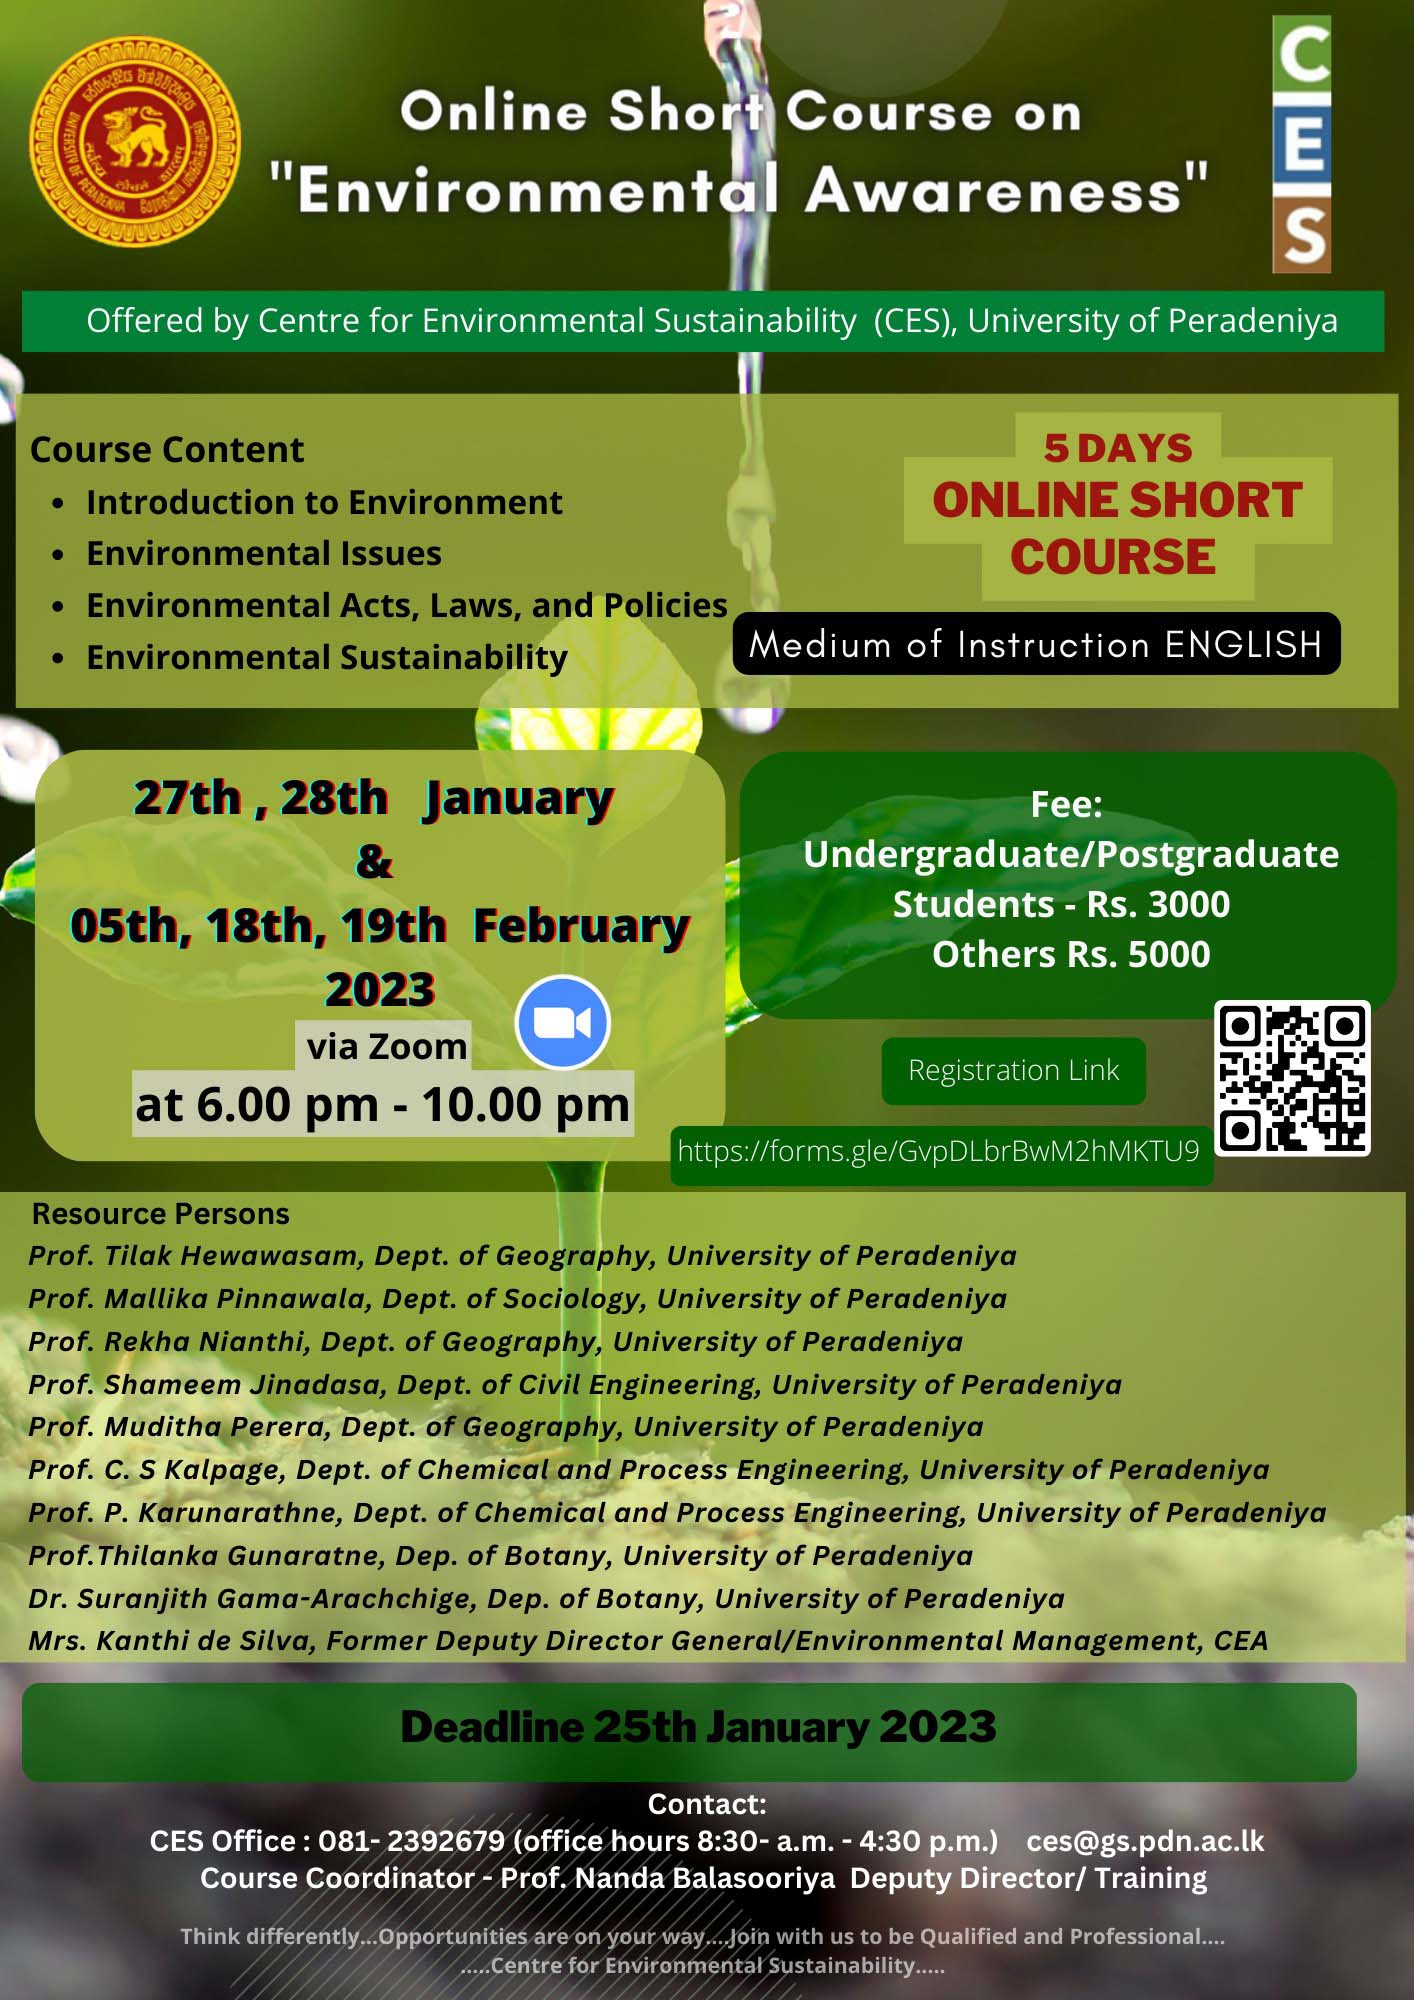 Call for Applications - Online Short Course on Environmental Awareness (2023) from the Centre for Environmental Sustainability, University of Peradeniya